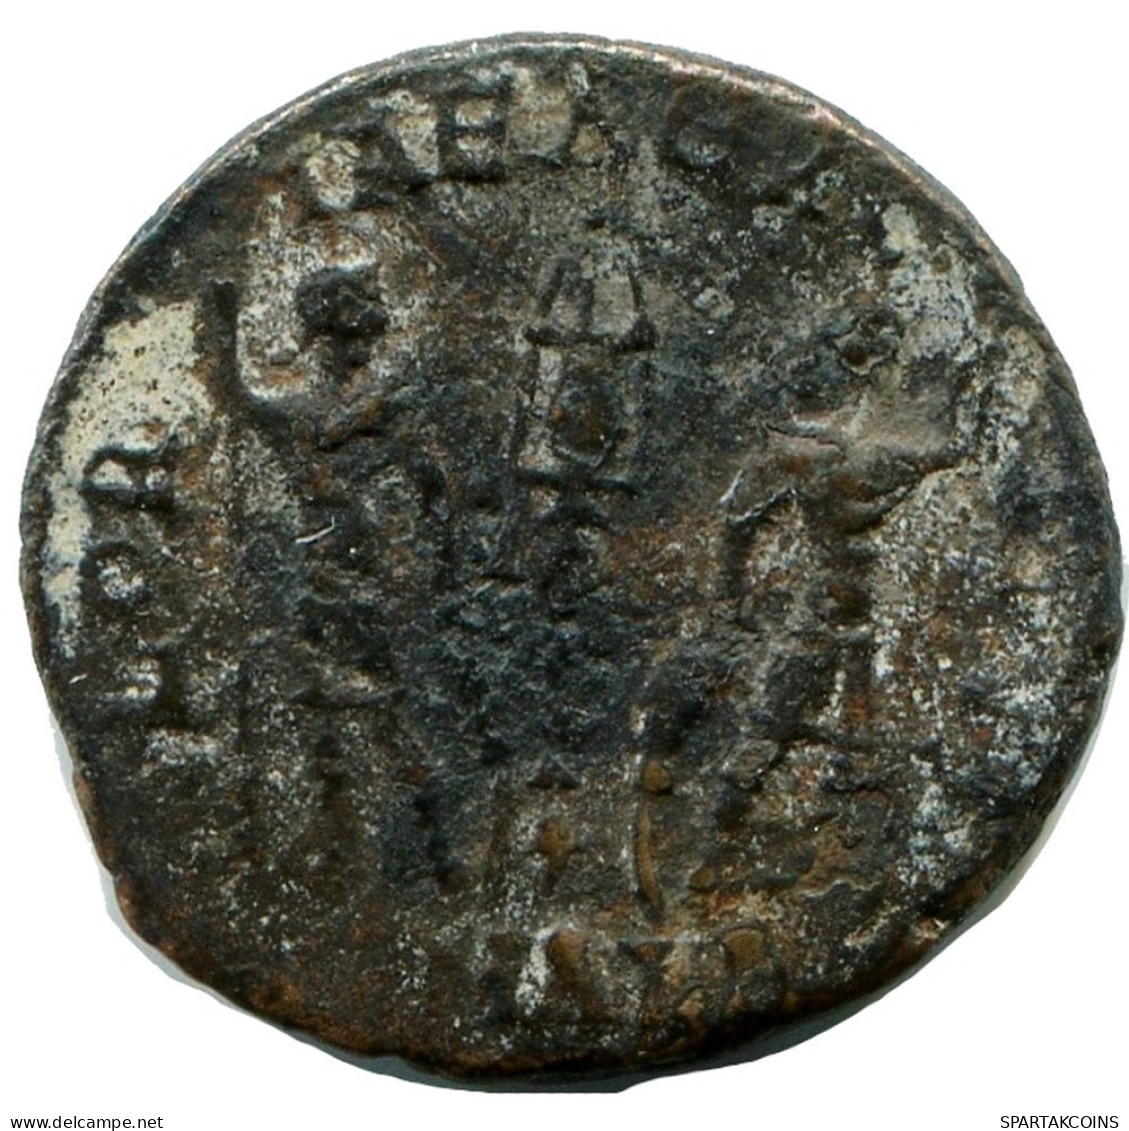 CONSTANS MINTED IN ALEKSANDRIA FOUND IN IHNASYAH HOARD EGYPT #ANC11349.14.D.A - The Christian Empire (307 AD Tot 363 AD)